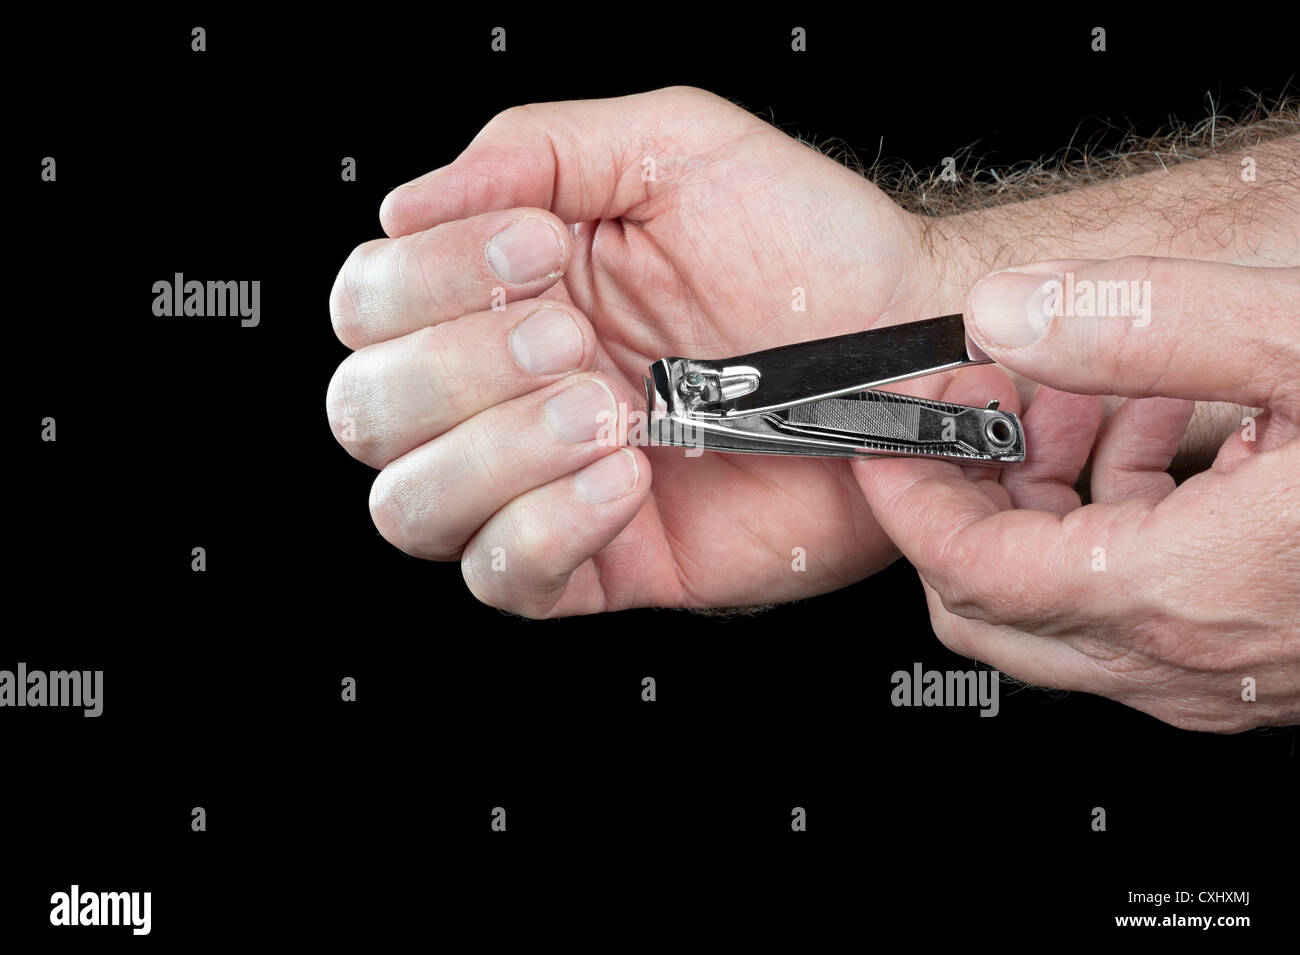 A man trims his fingernails using a metallic pair of nail clippers. Stock Photo